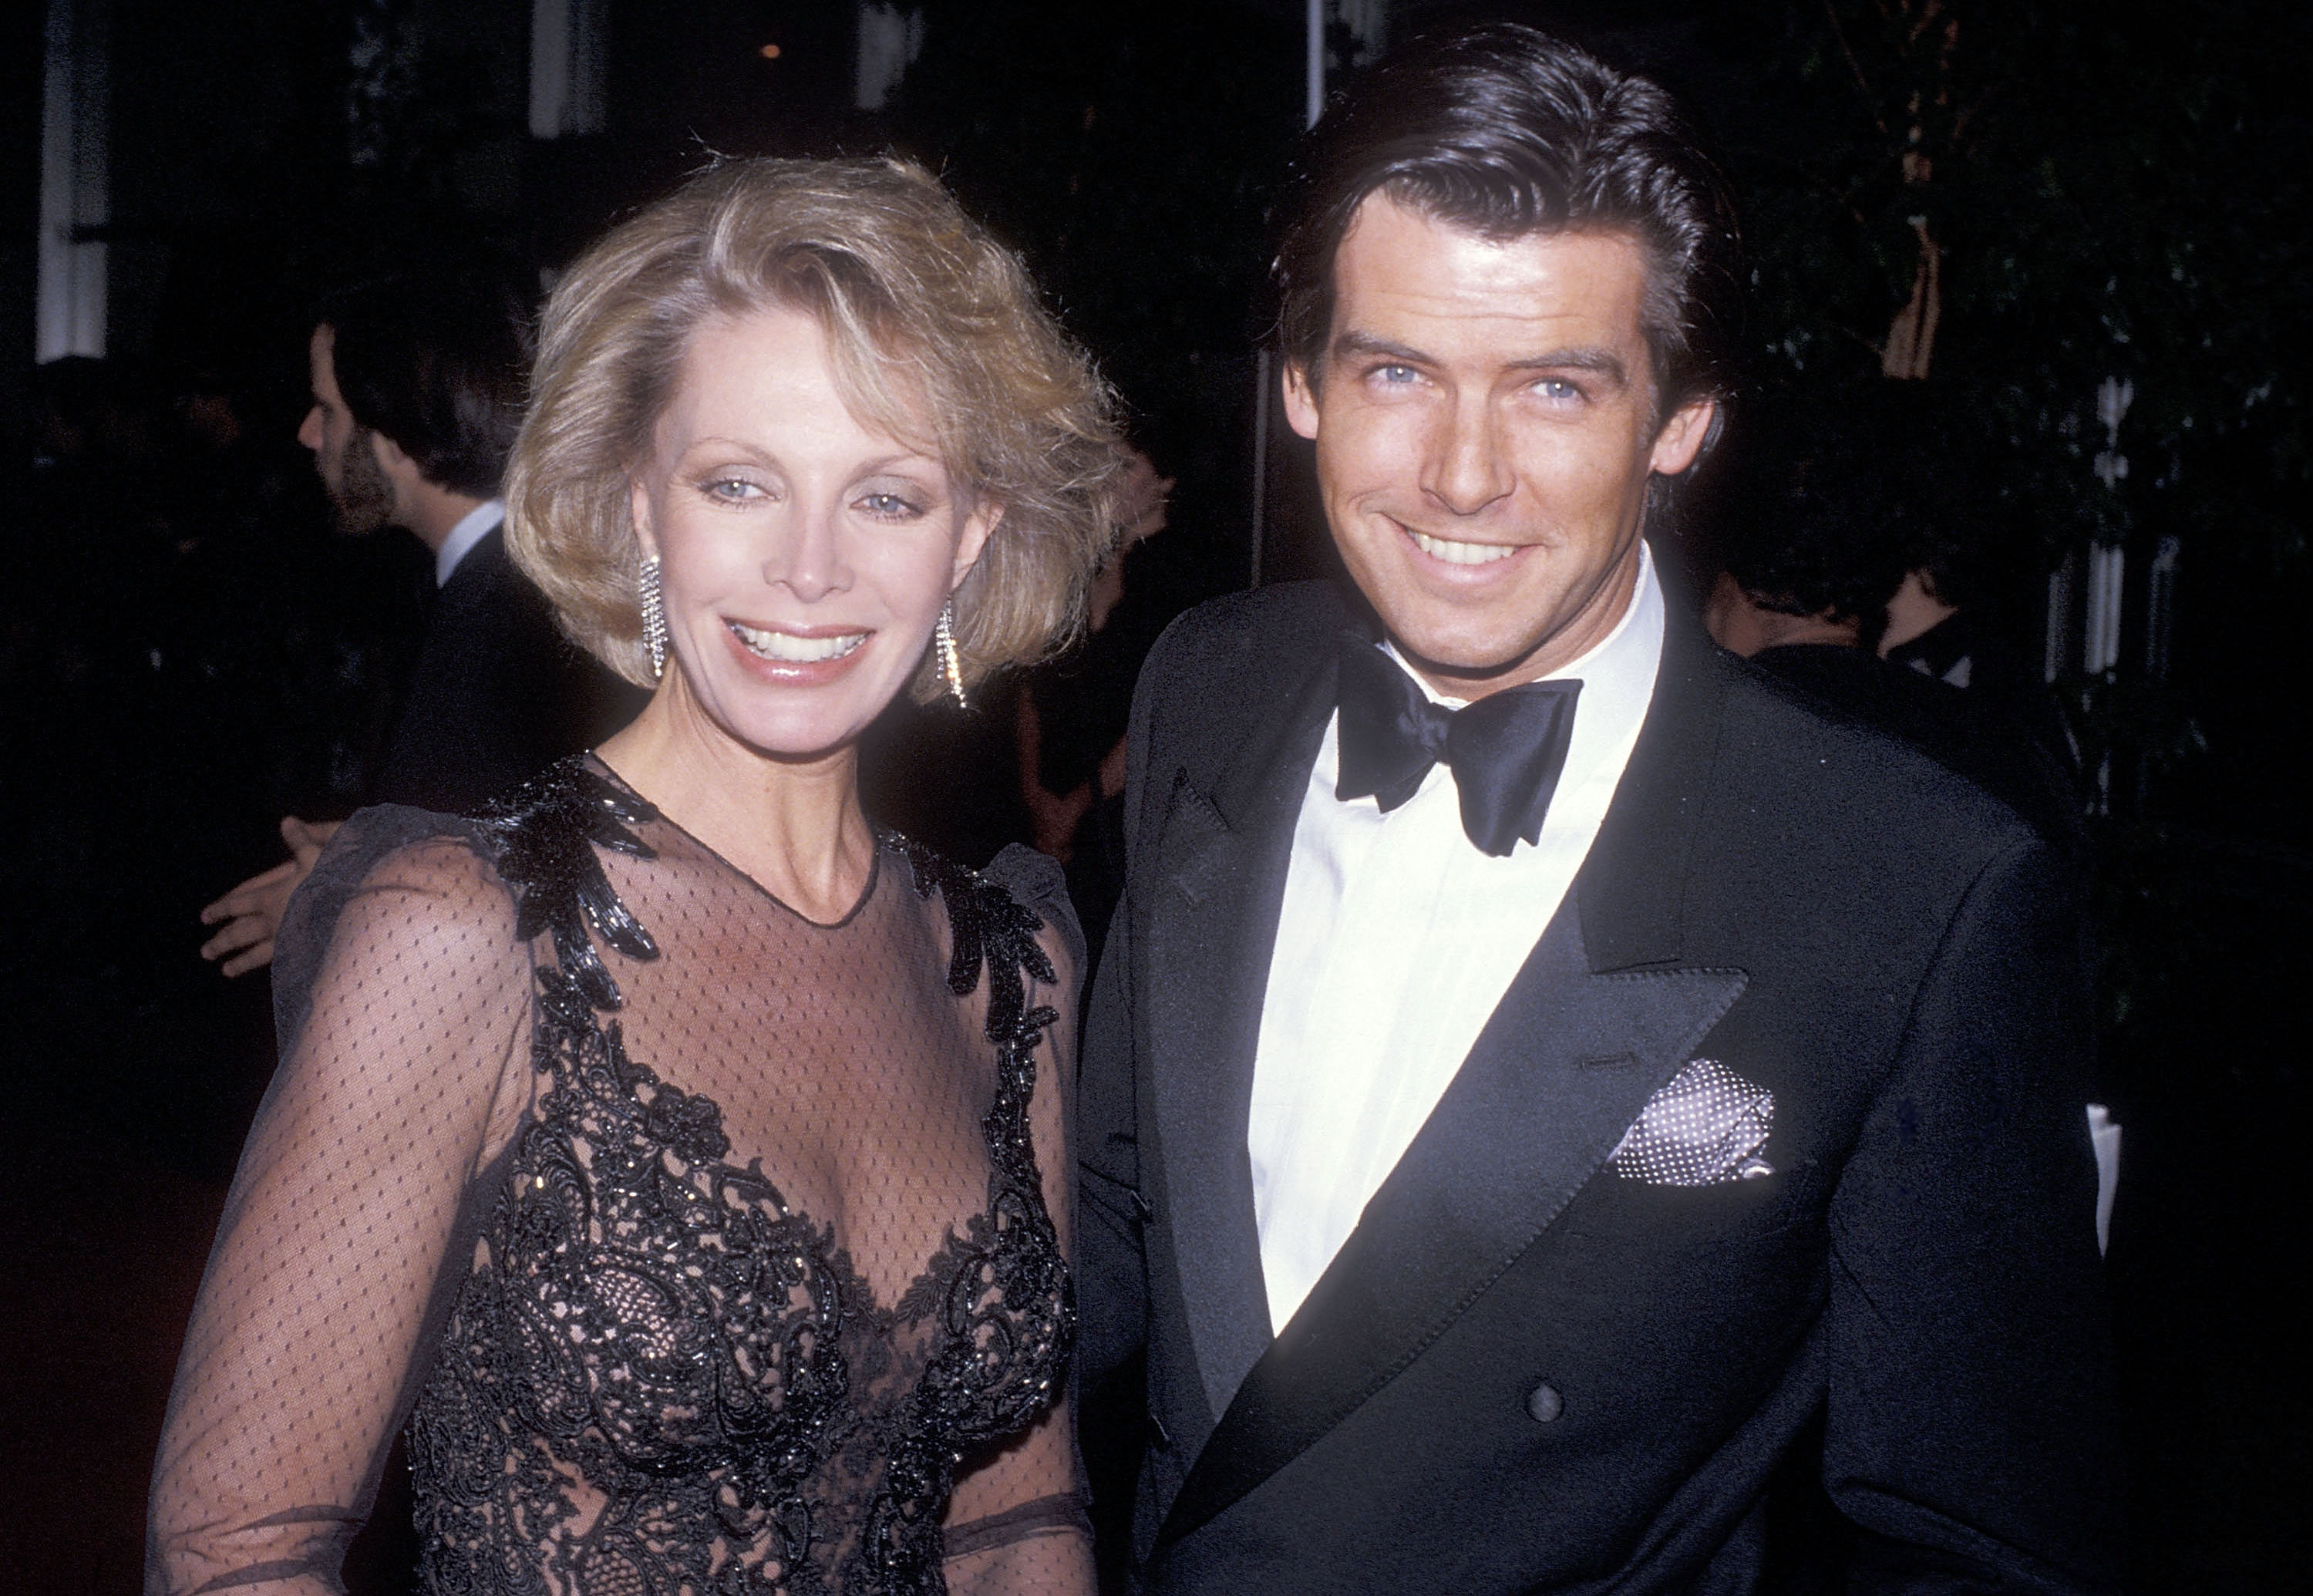 Pierce Brosnan and wife Cassandra Harris attend the 42nd Annual Golden Globe Awards on January 26, 1985 at the Beverly Hilton Hotel in Beverly Hills, California. | Source: Getty Images